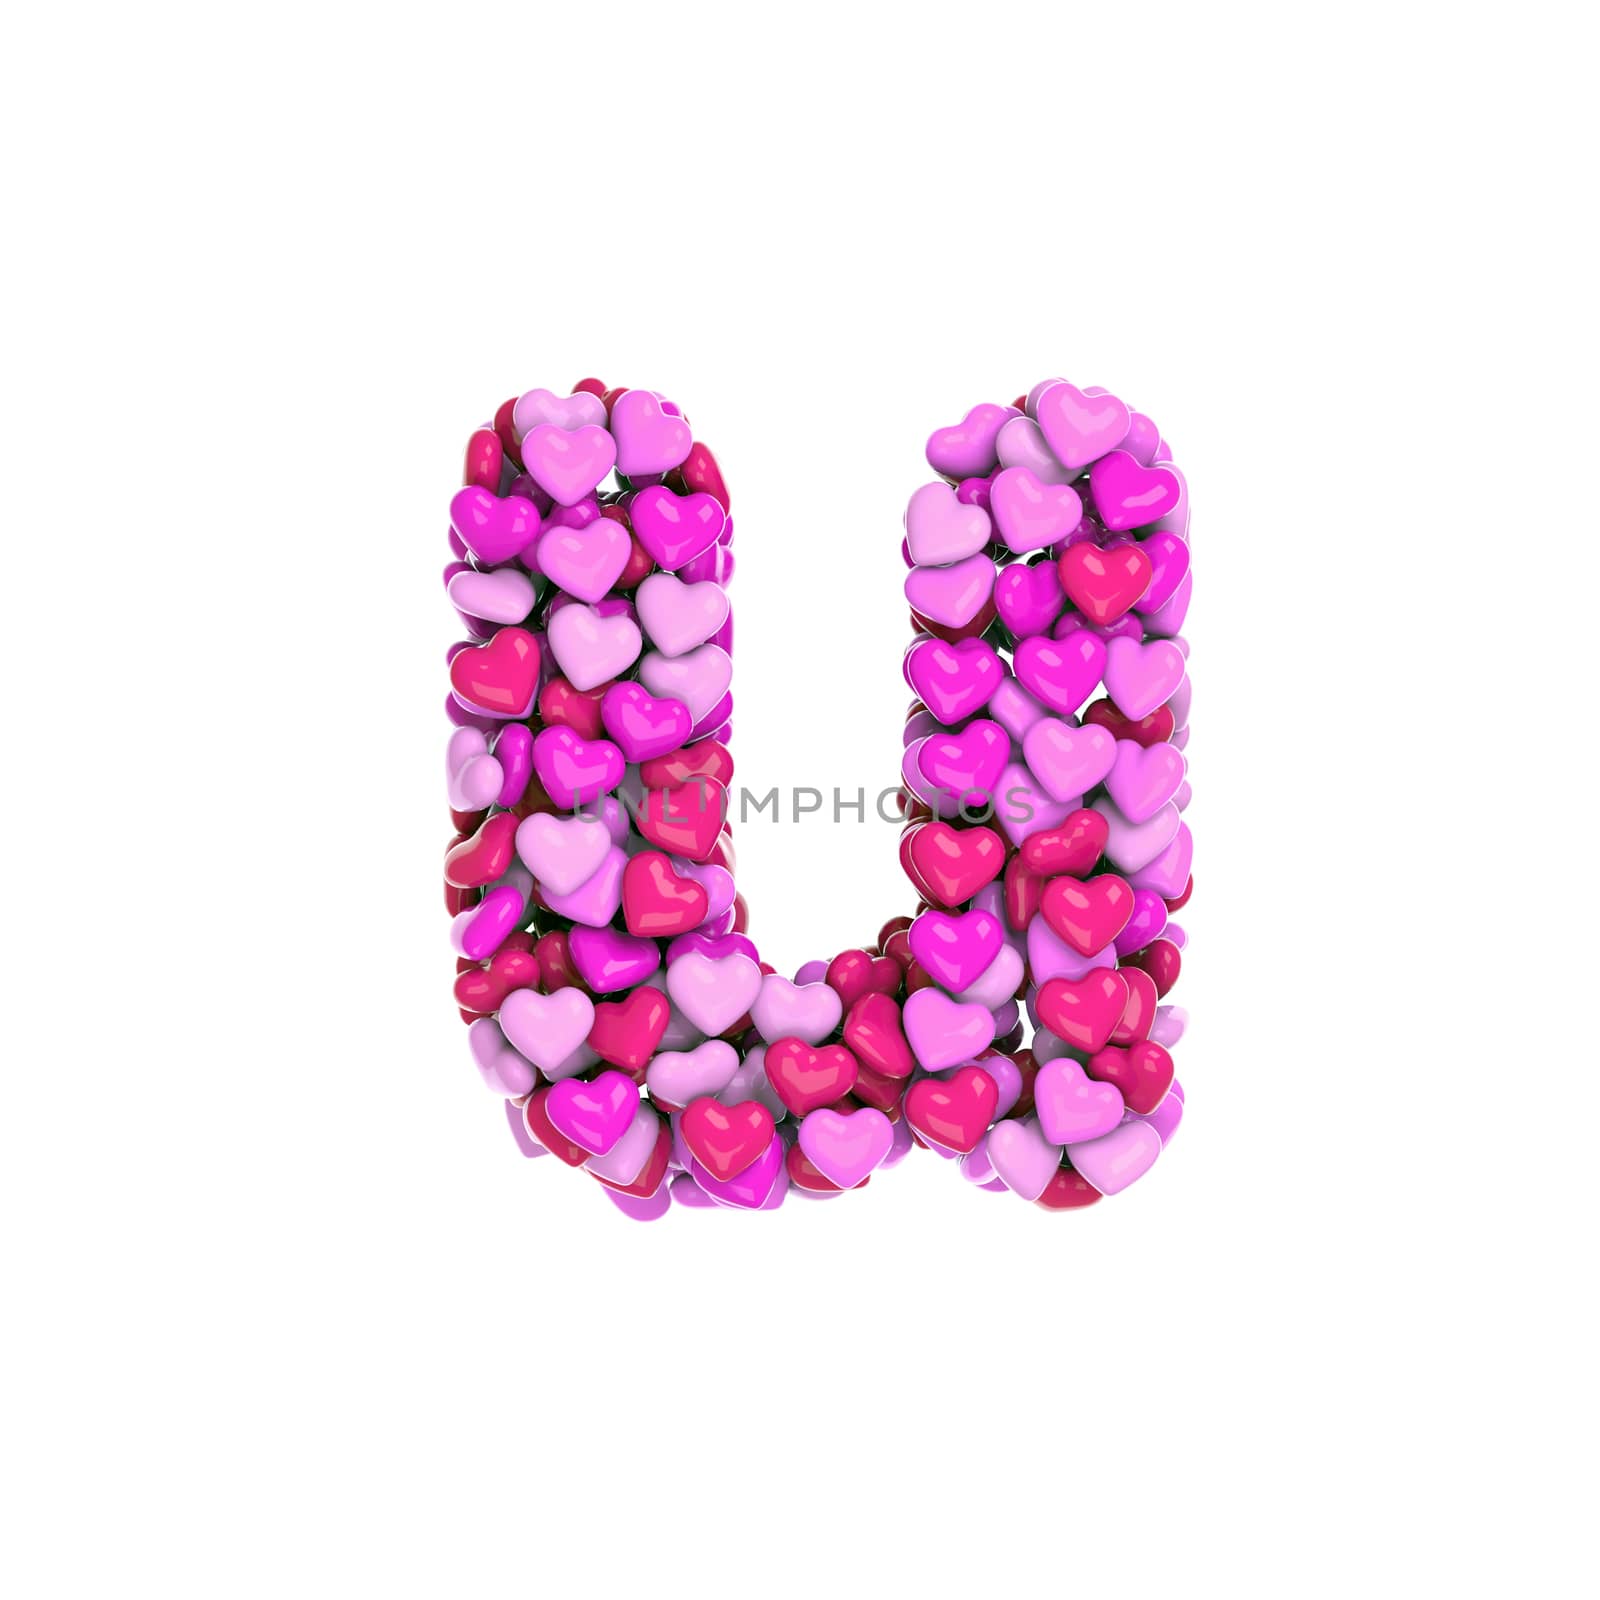 Valentine letter U - Small 3d pink hearts font - Love, passion or wedding concept by chrisroll